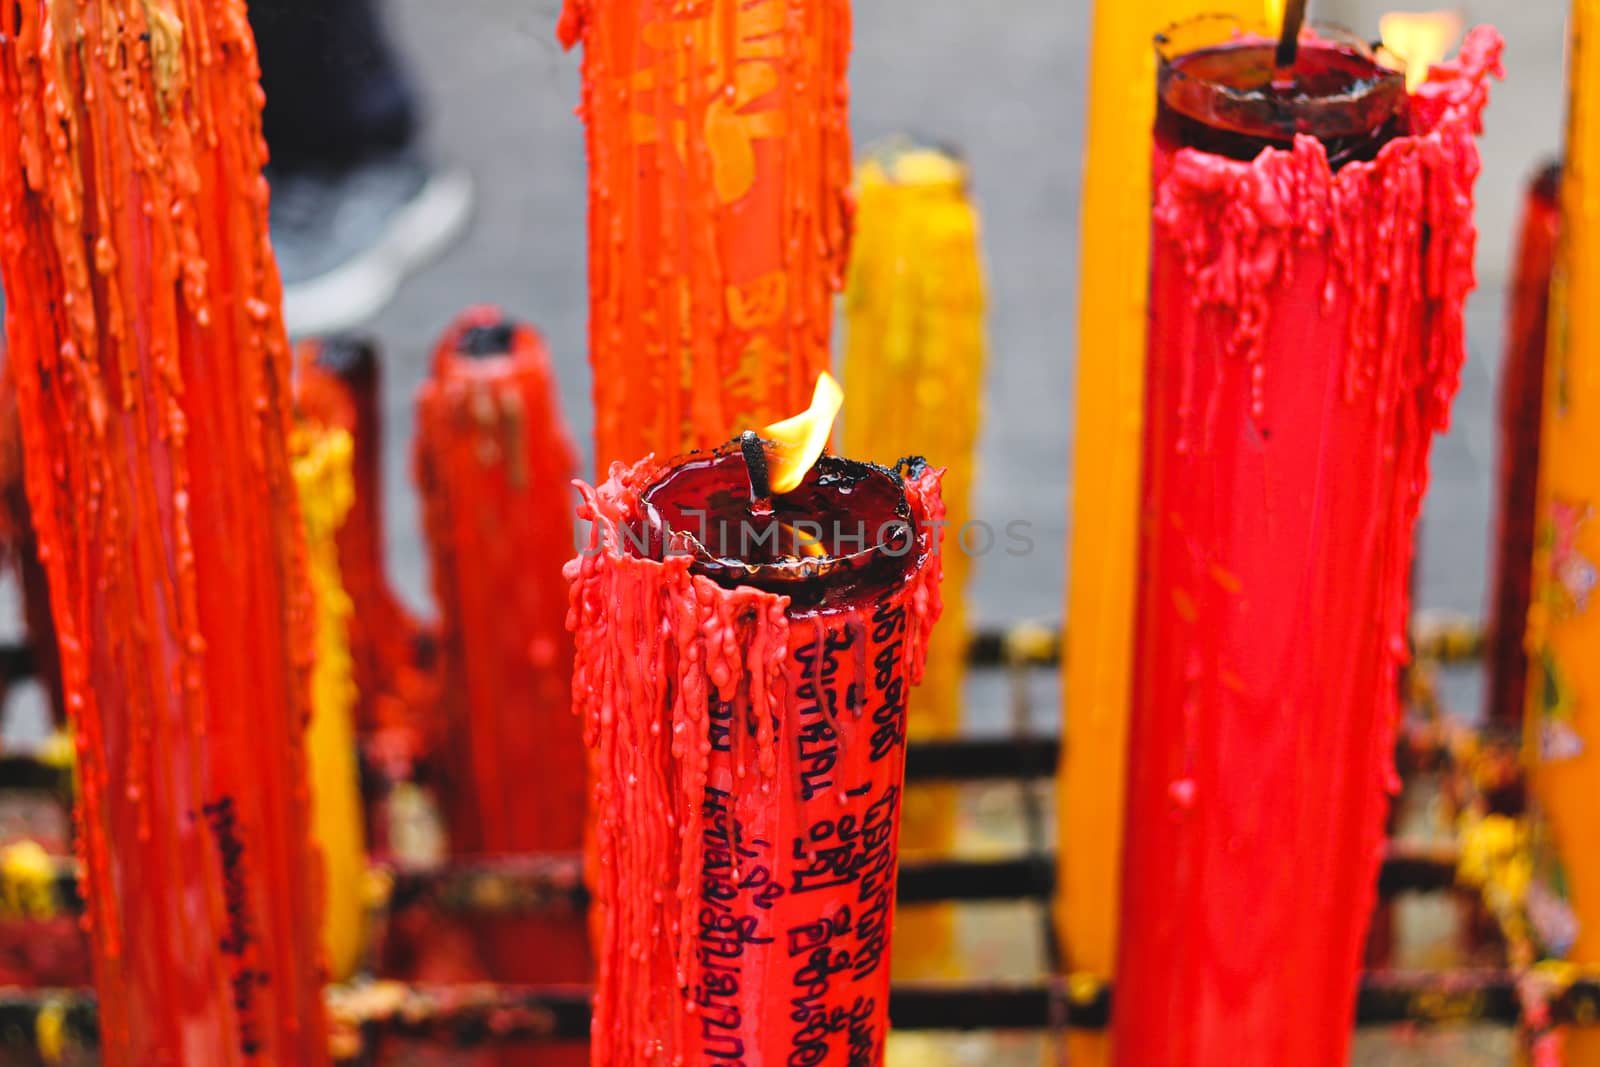 Red candles use as prayer offerings in Chinese tradition during Lunar New Year